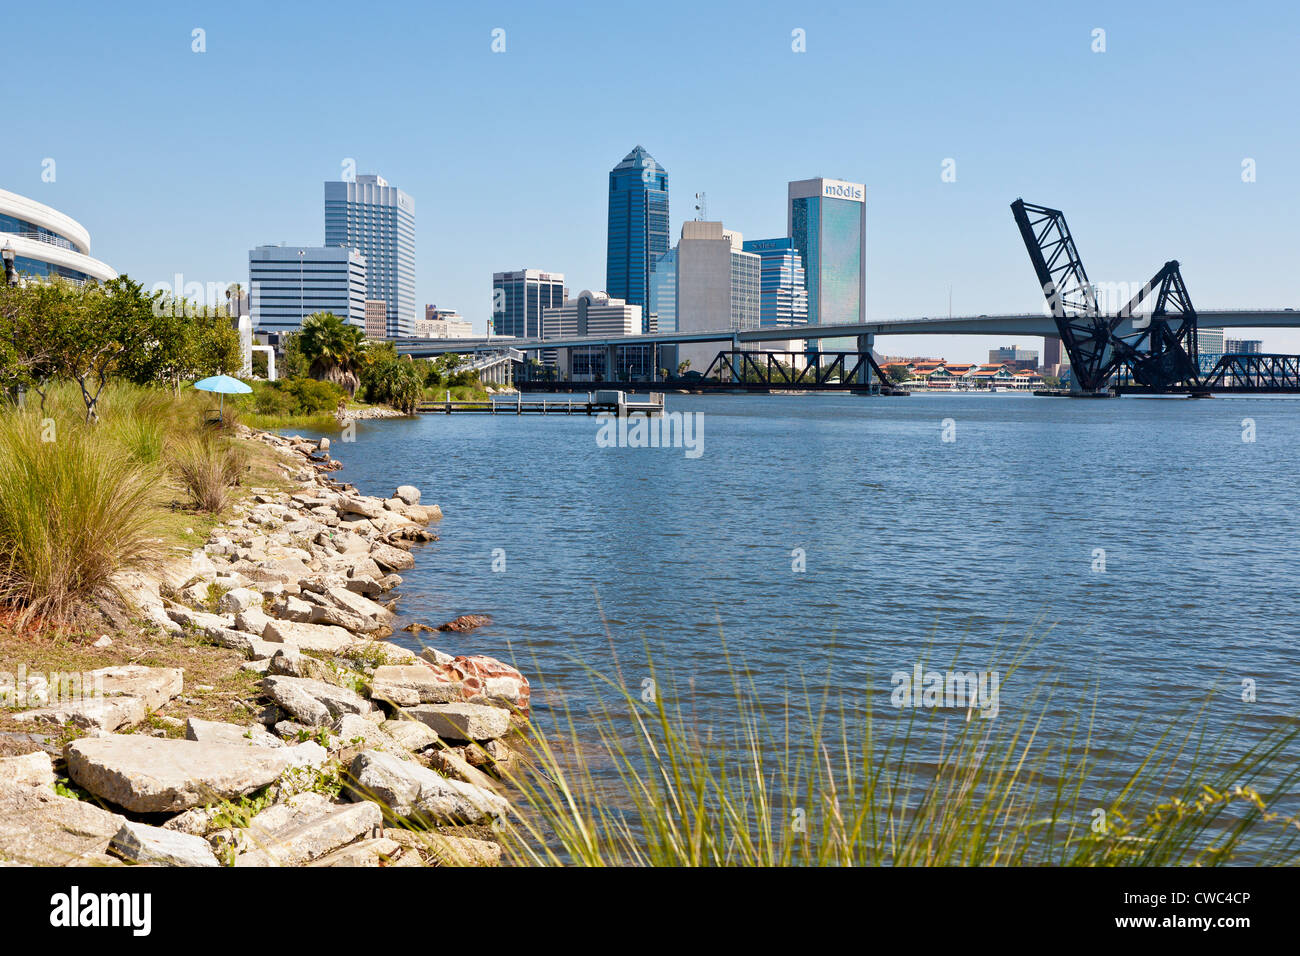 High rise buildings along the shore of the St. Johns River in Jacksonville, FL Stock Photo